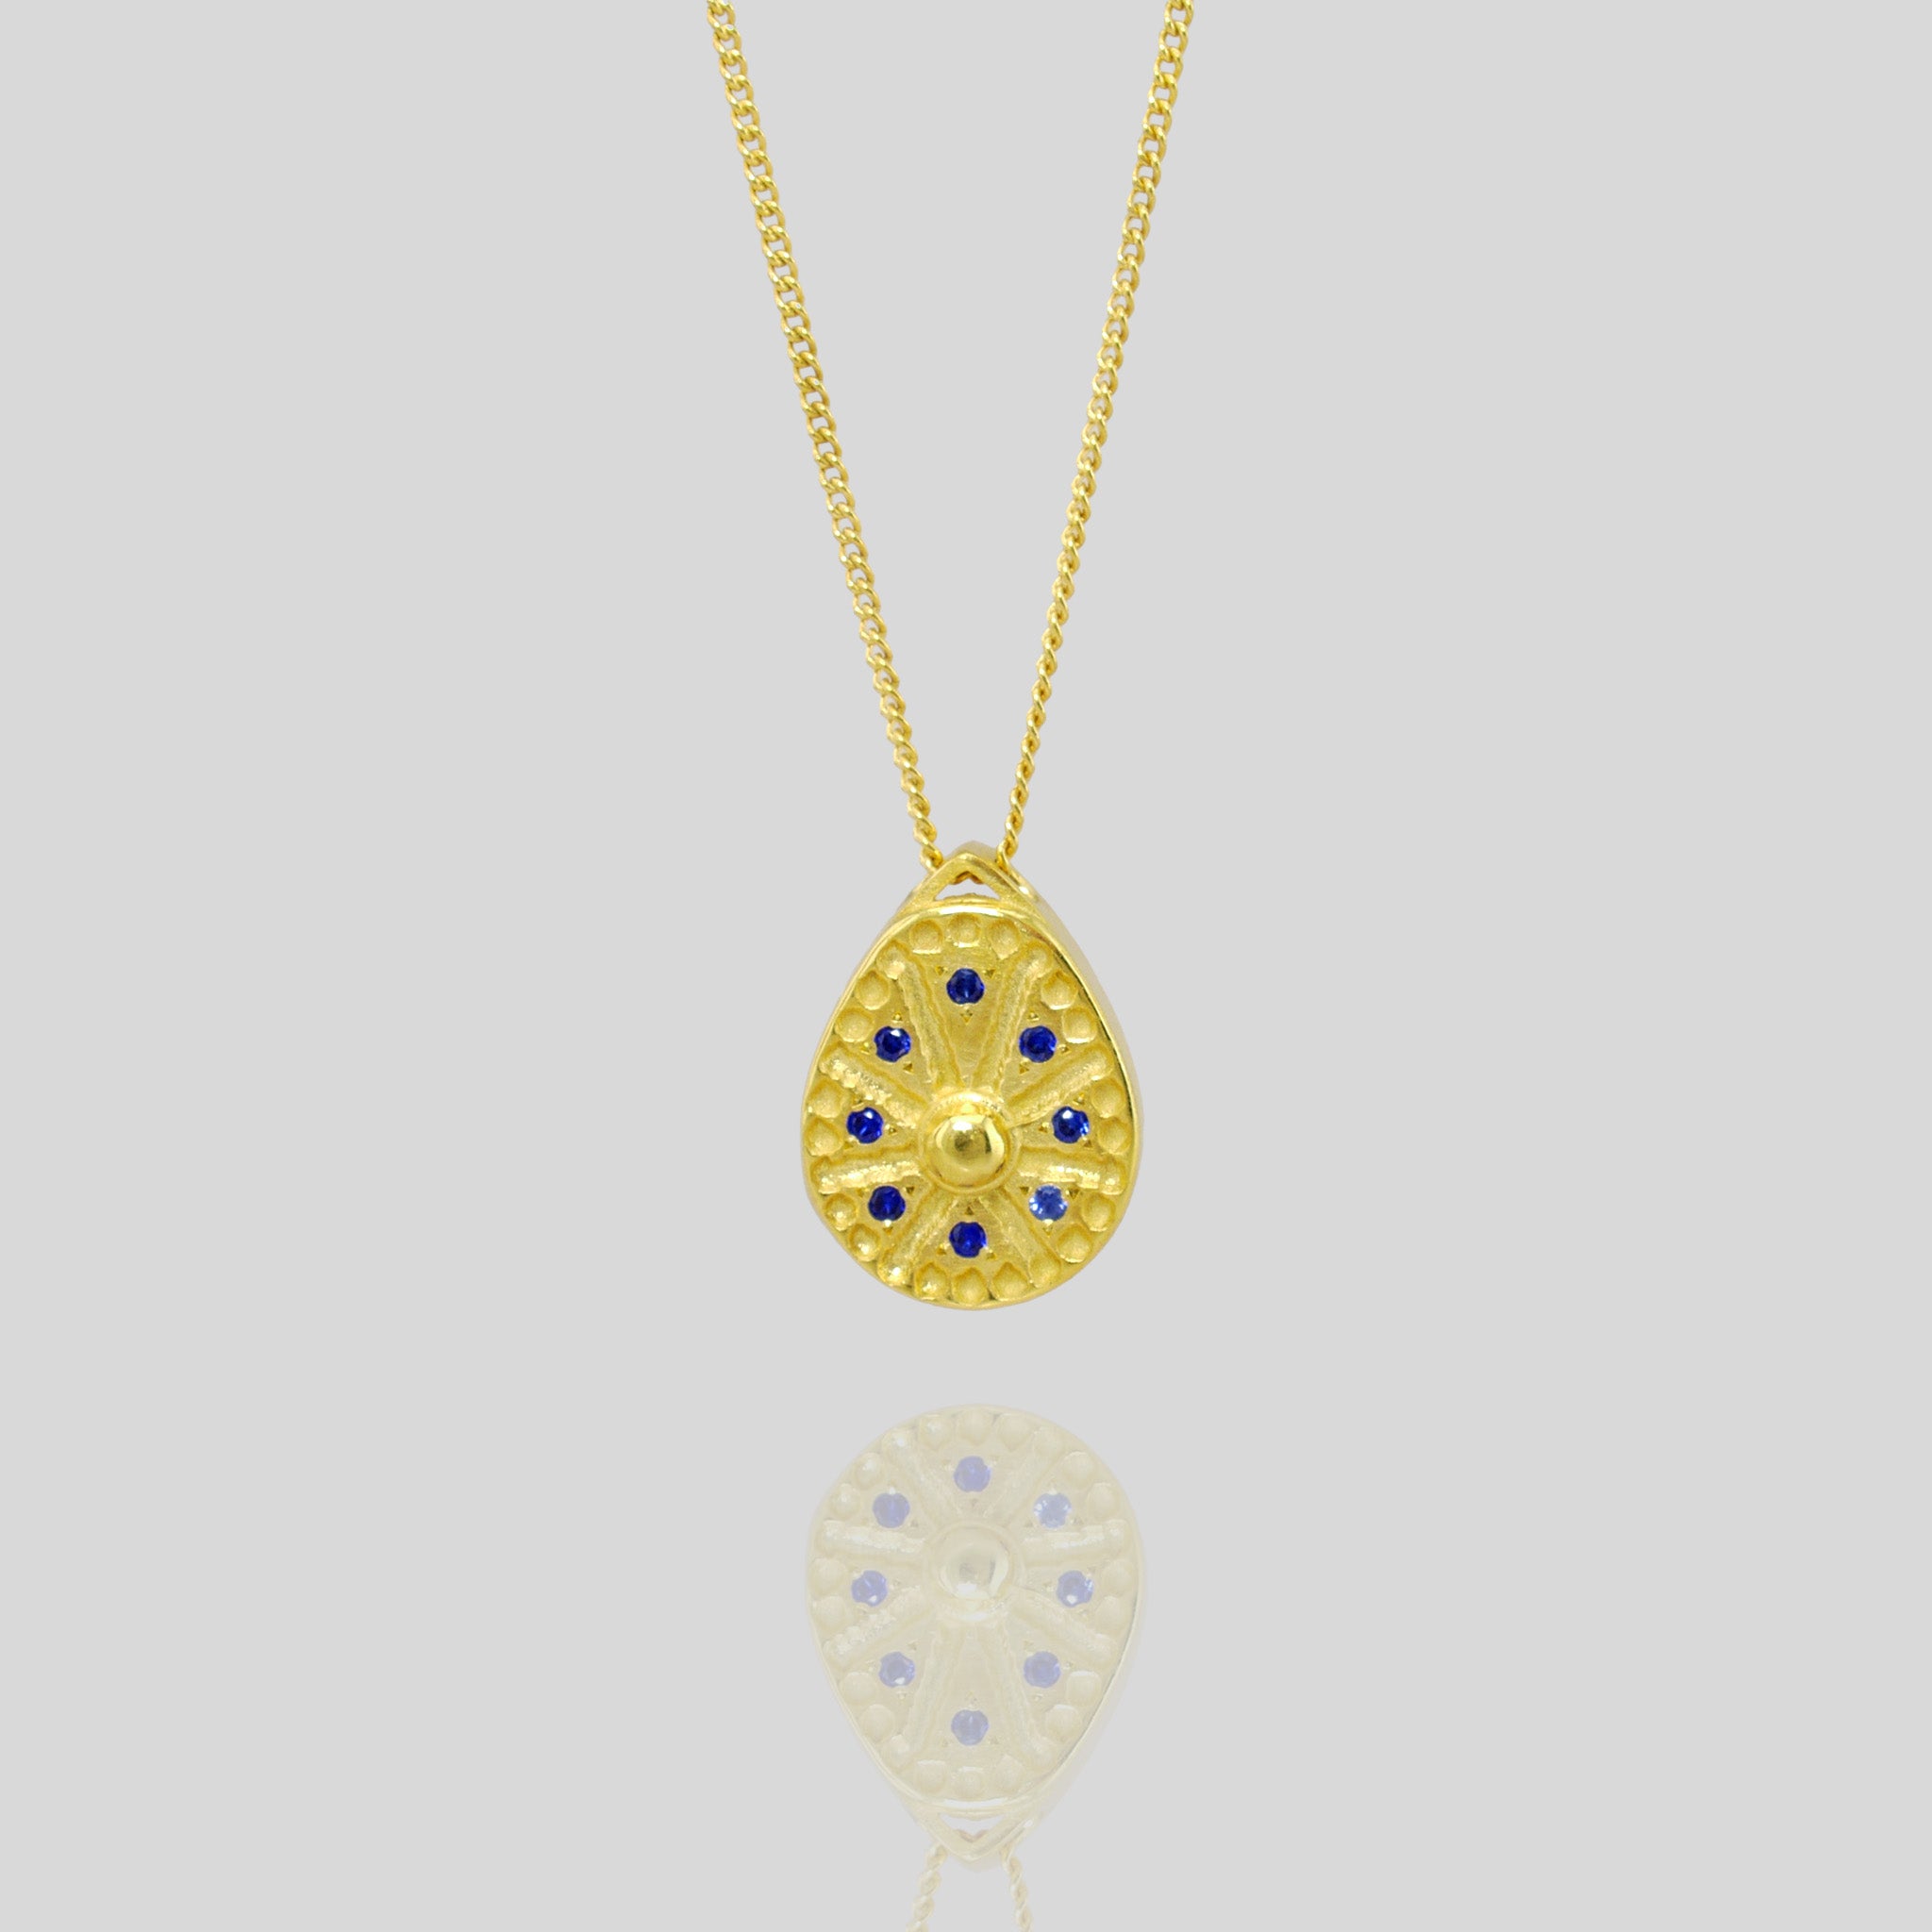 Close up of 18k Gold pendant resembling a Sundial clock, accented with small Sapphires between the edges of each clock hand. A luxurious and timeless addition to any collection.